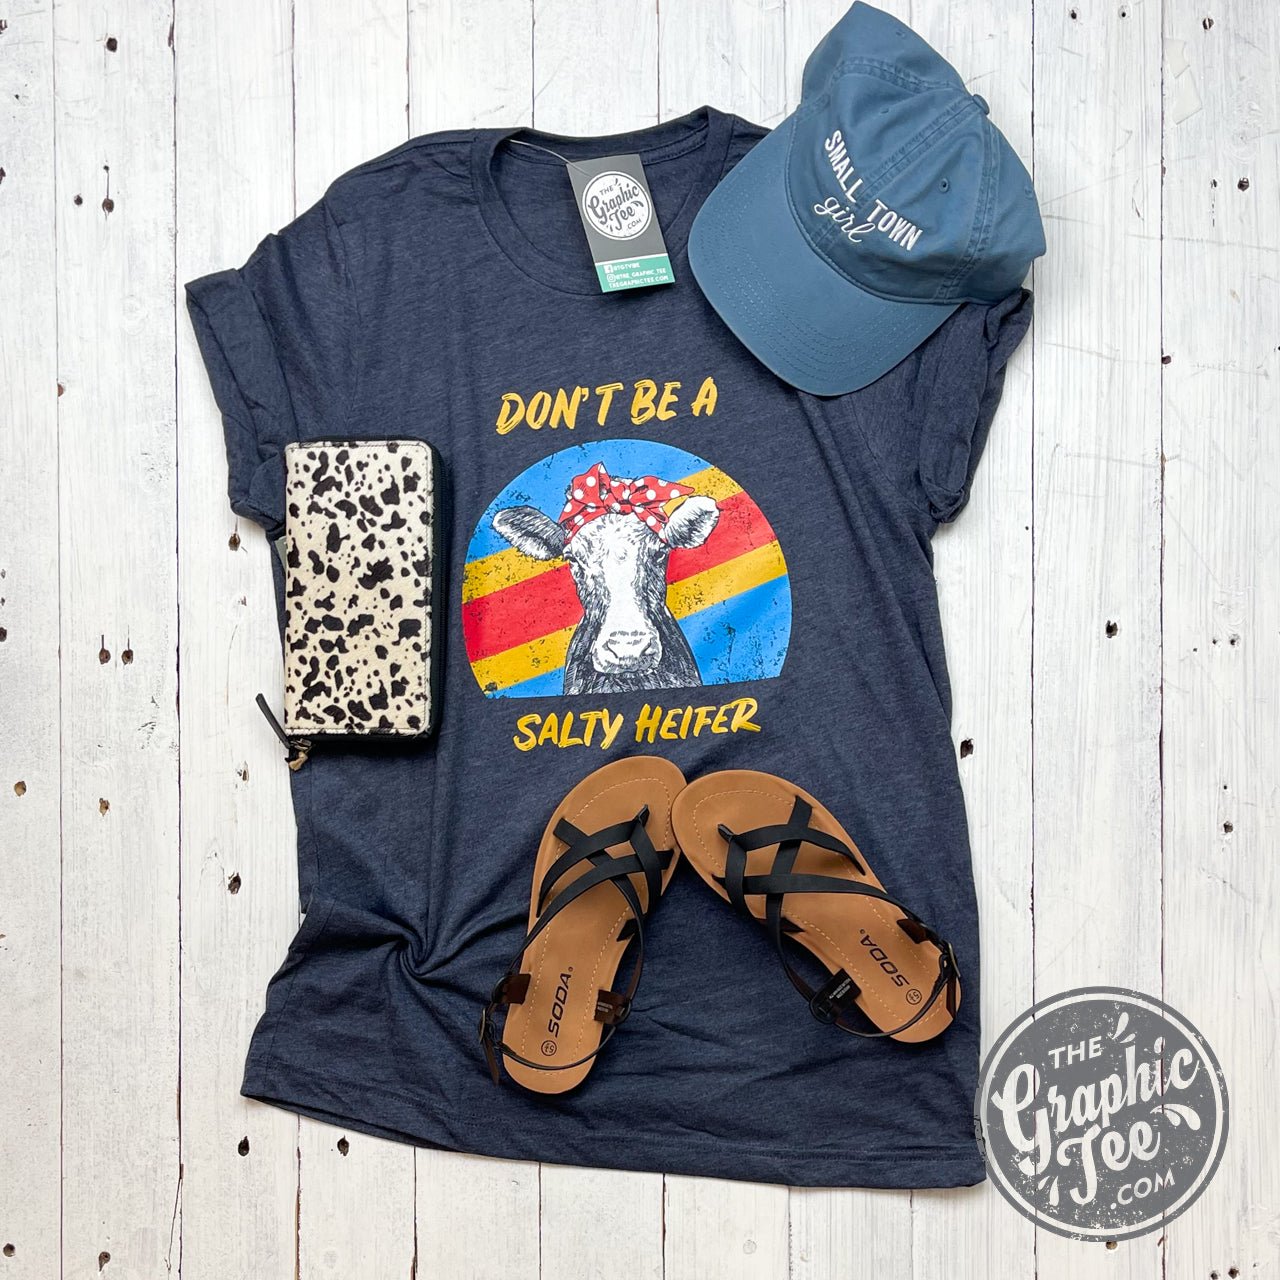 Don't Be A Salty Heifer - Heather Midnight Navy Tee - The Graphic Tee